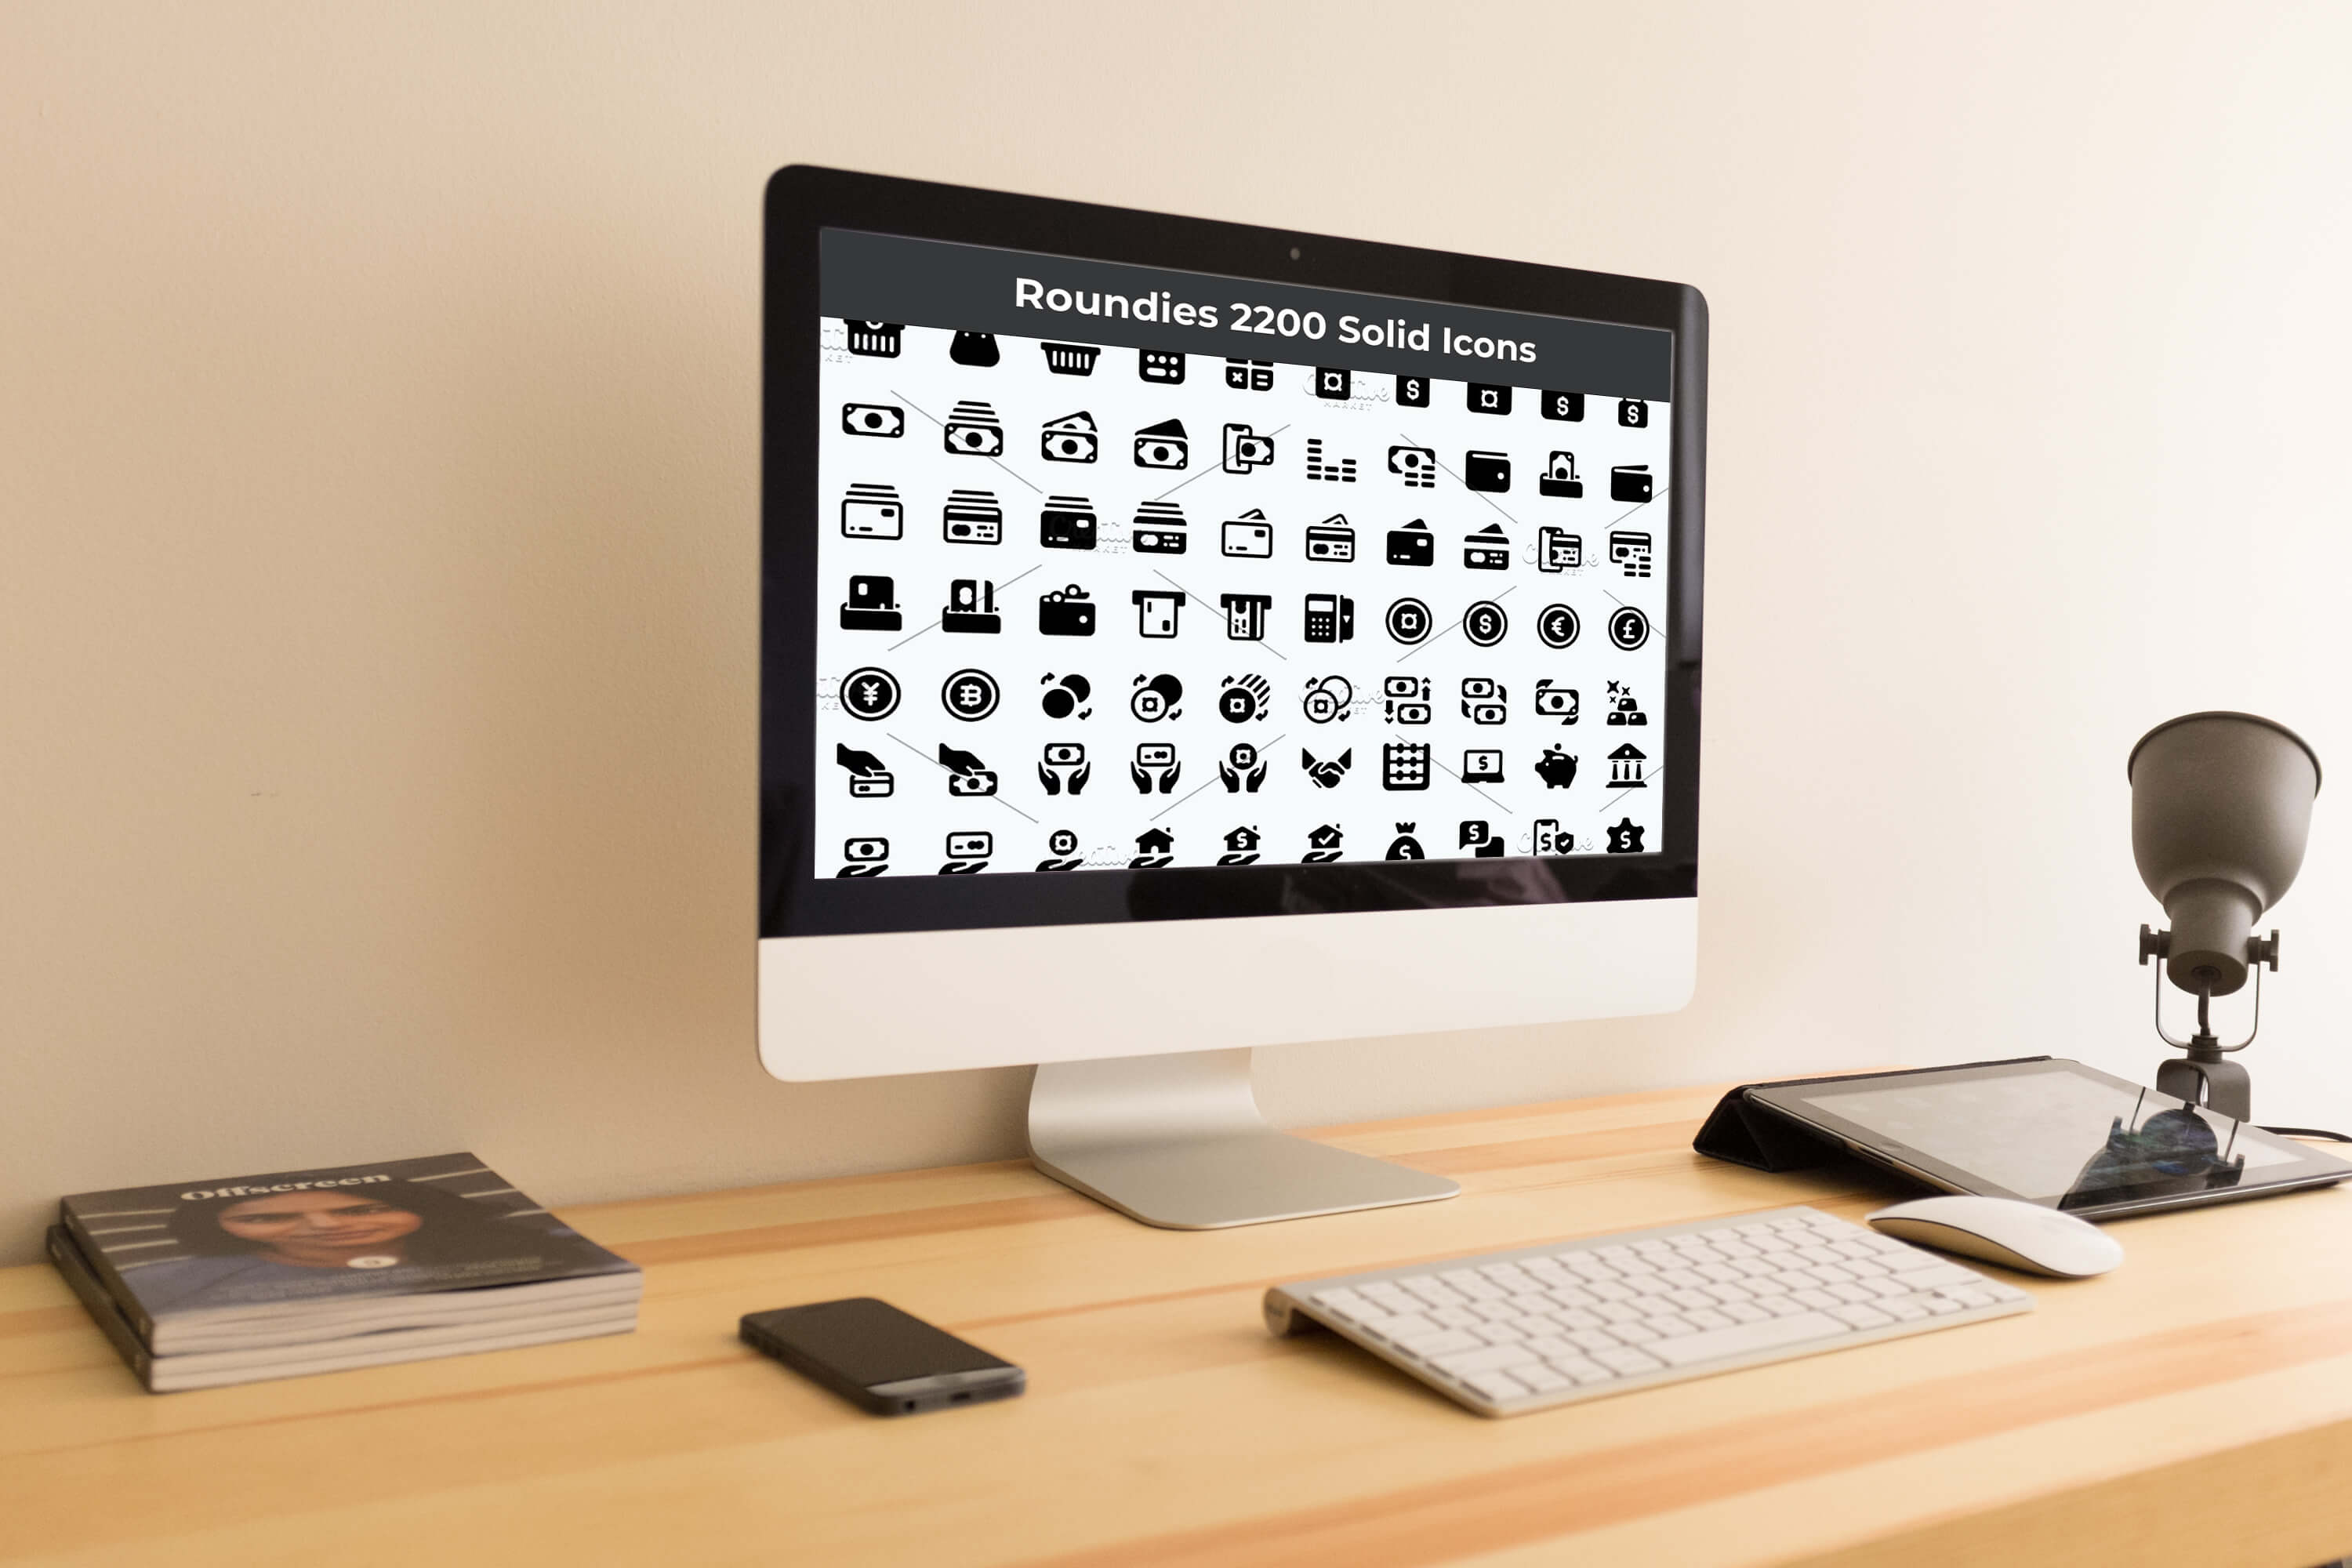 Desktop option of the Roundies 2200 Solid Icons